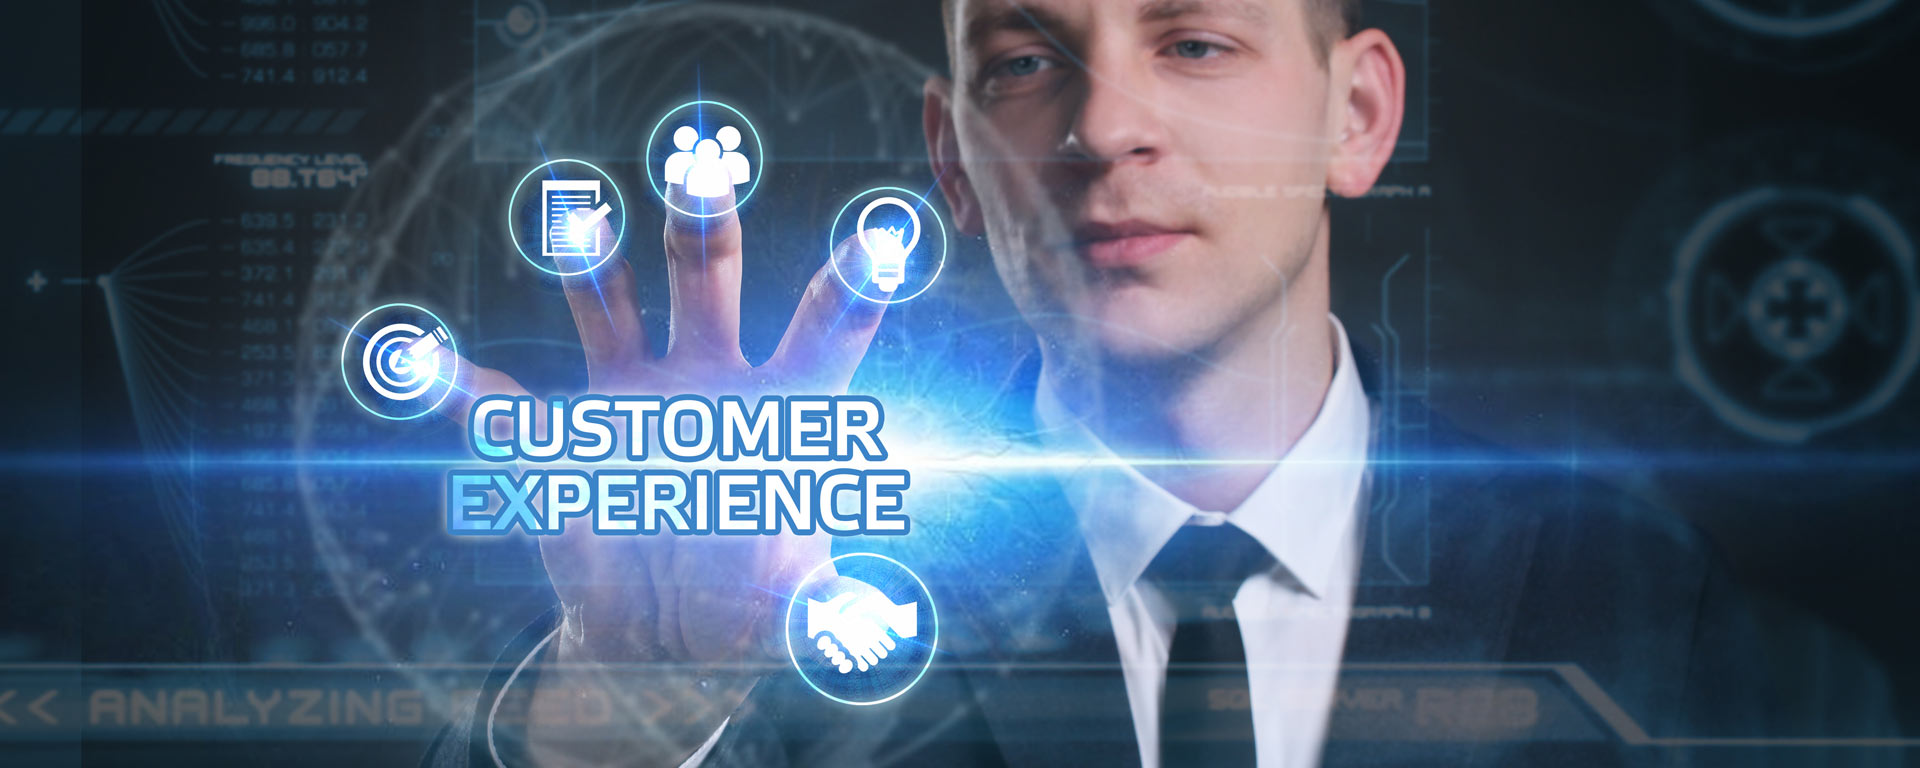 Sweven Delivers Superior CRM & Customer Experience